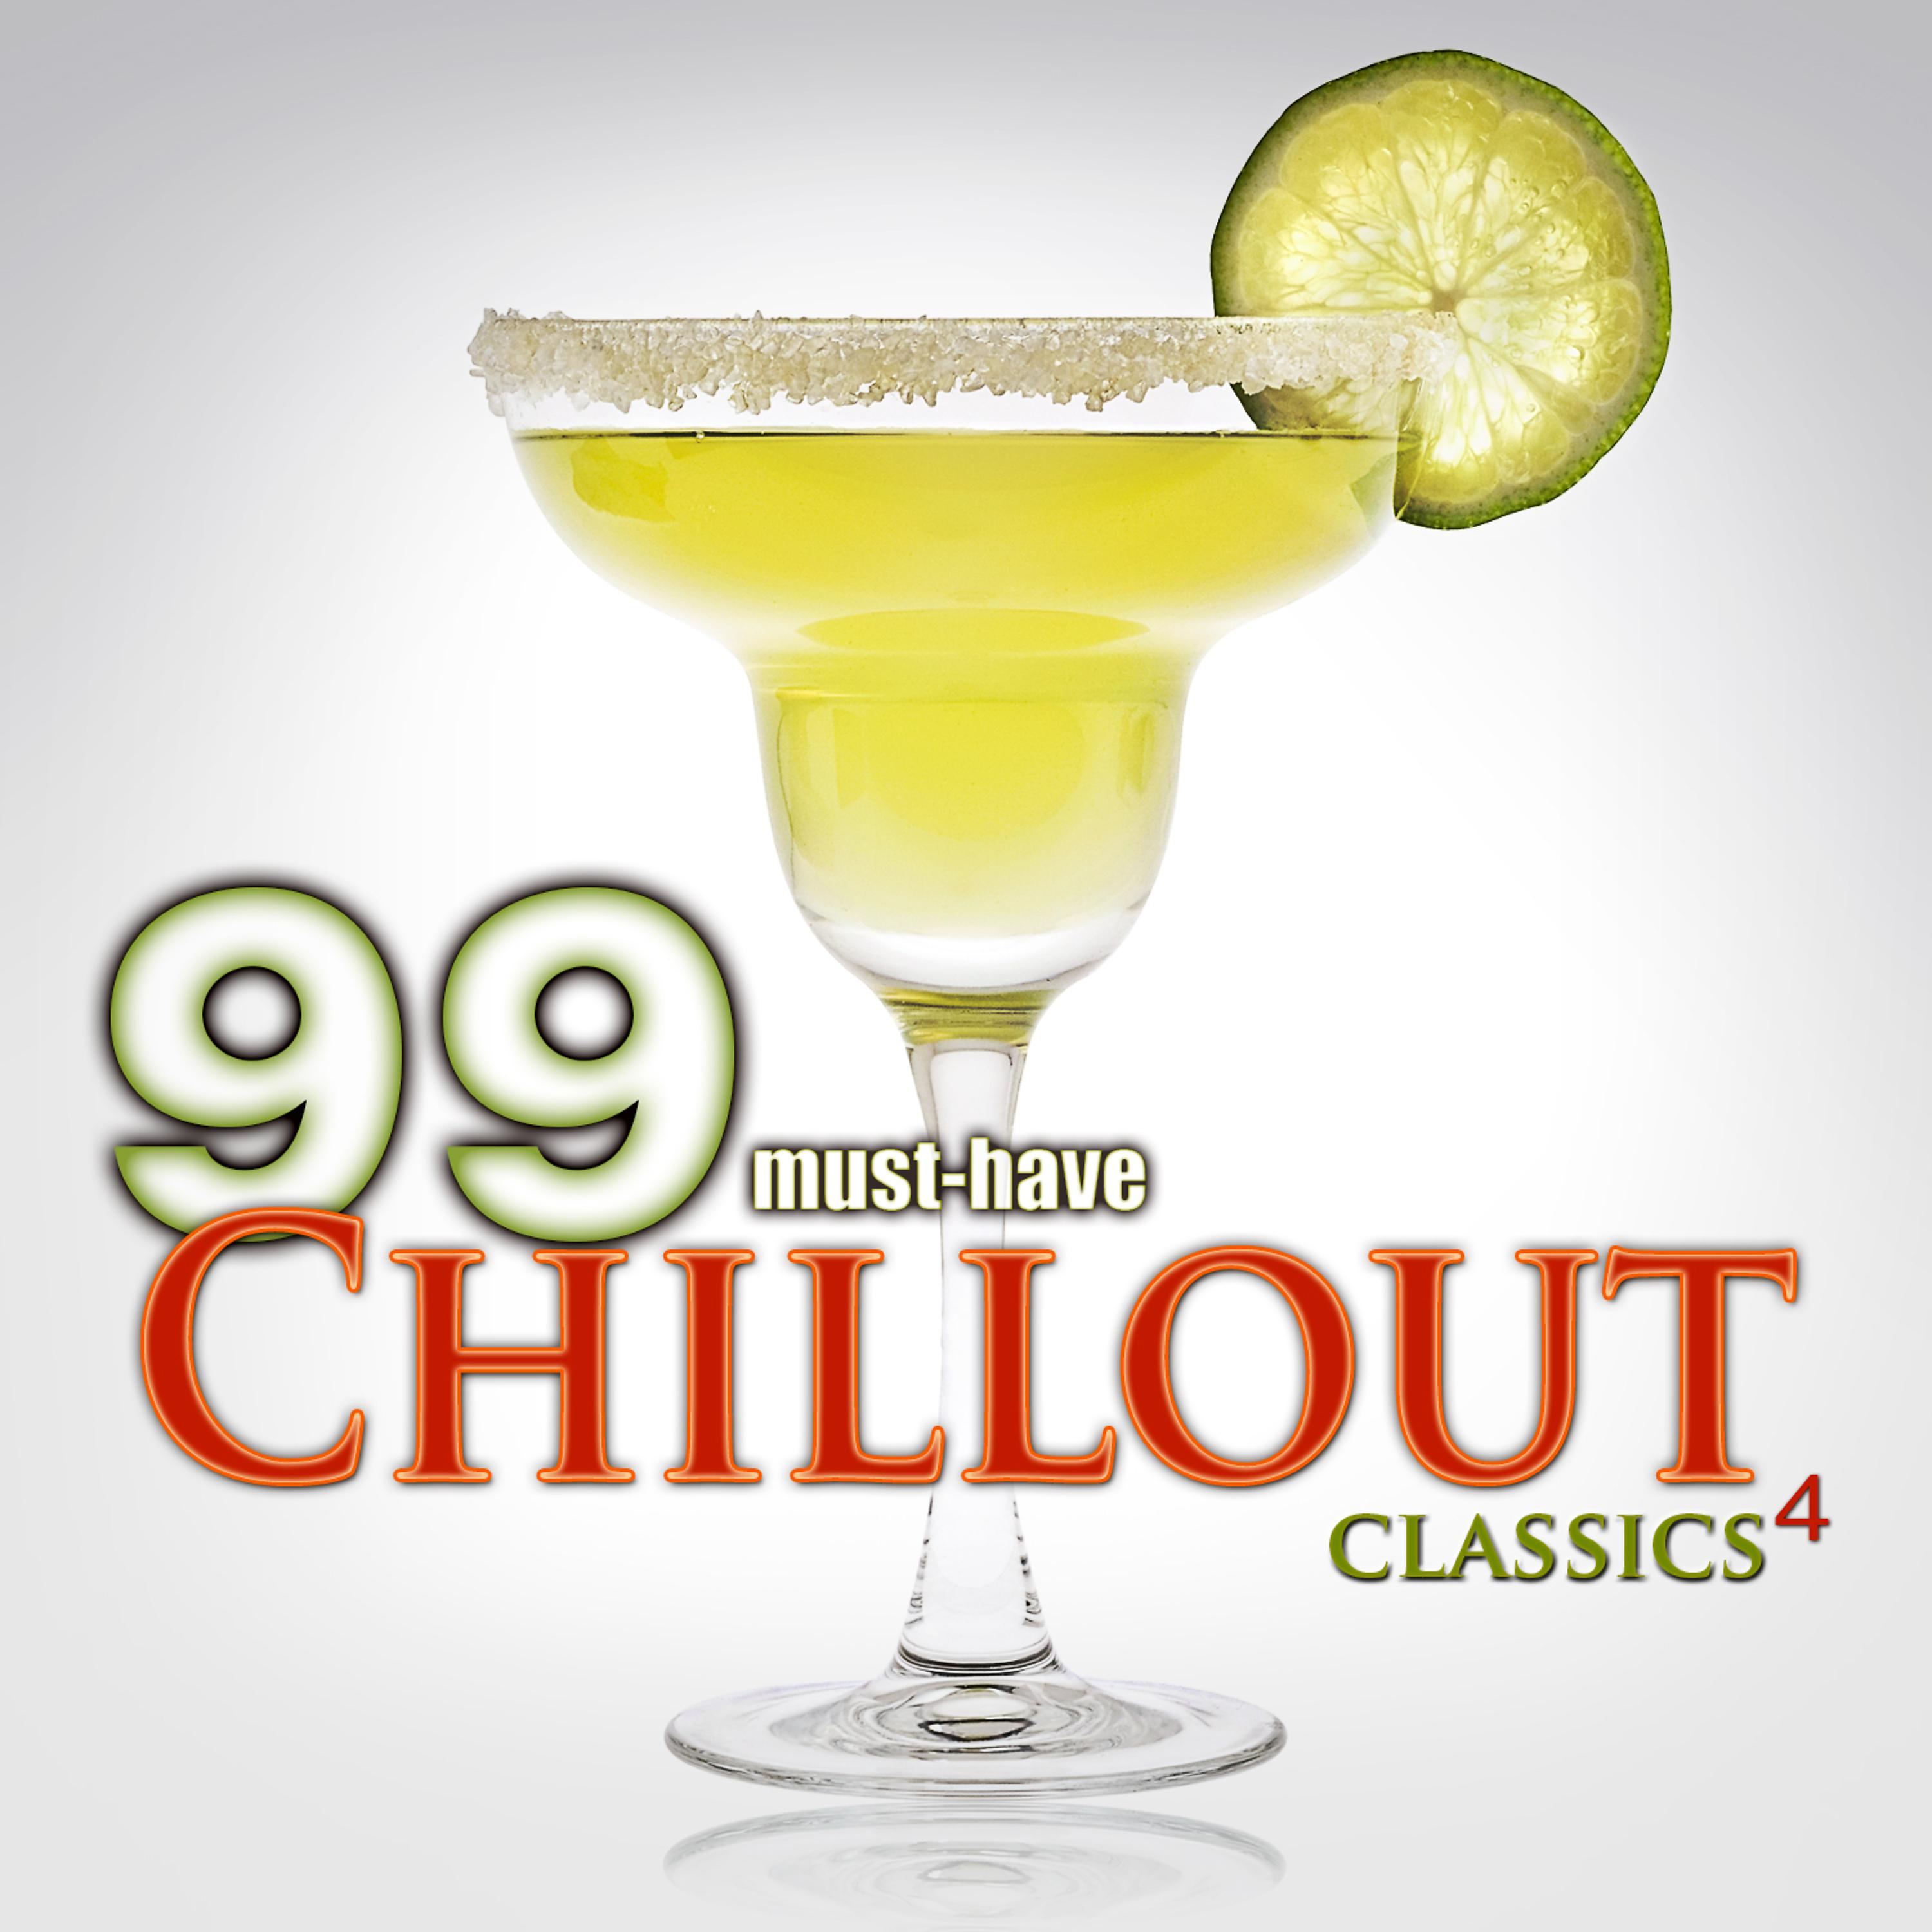 Постер альбома 99 Must-Have Chillout Classics 4